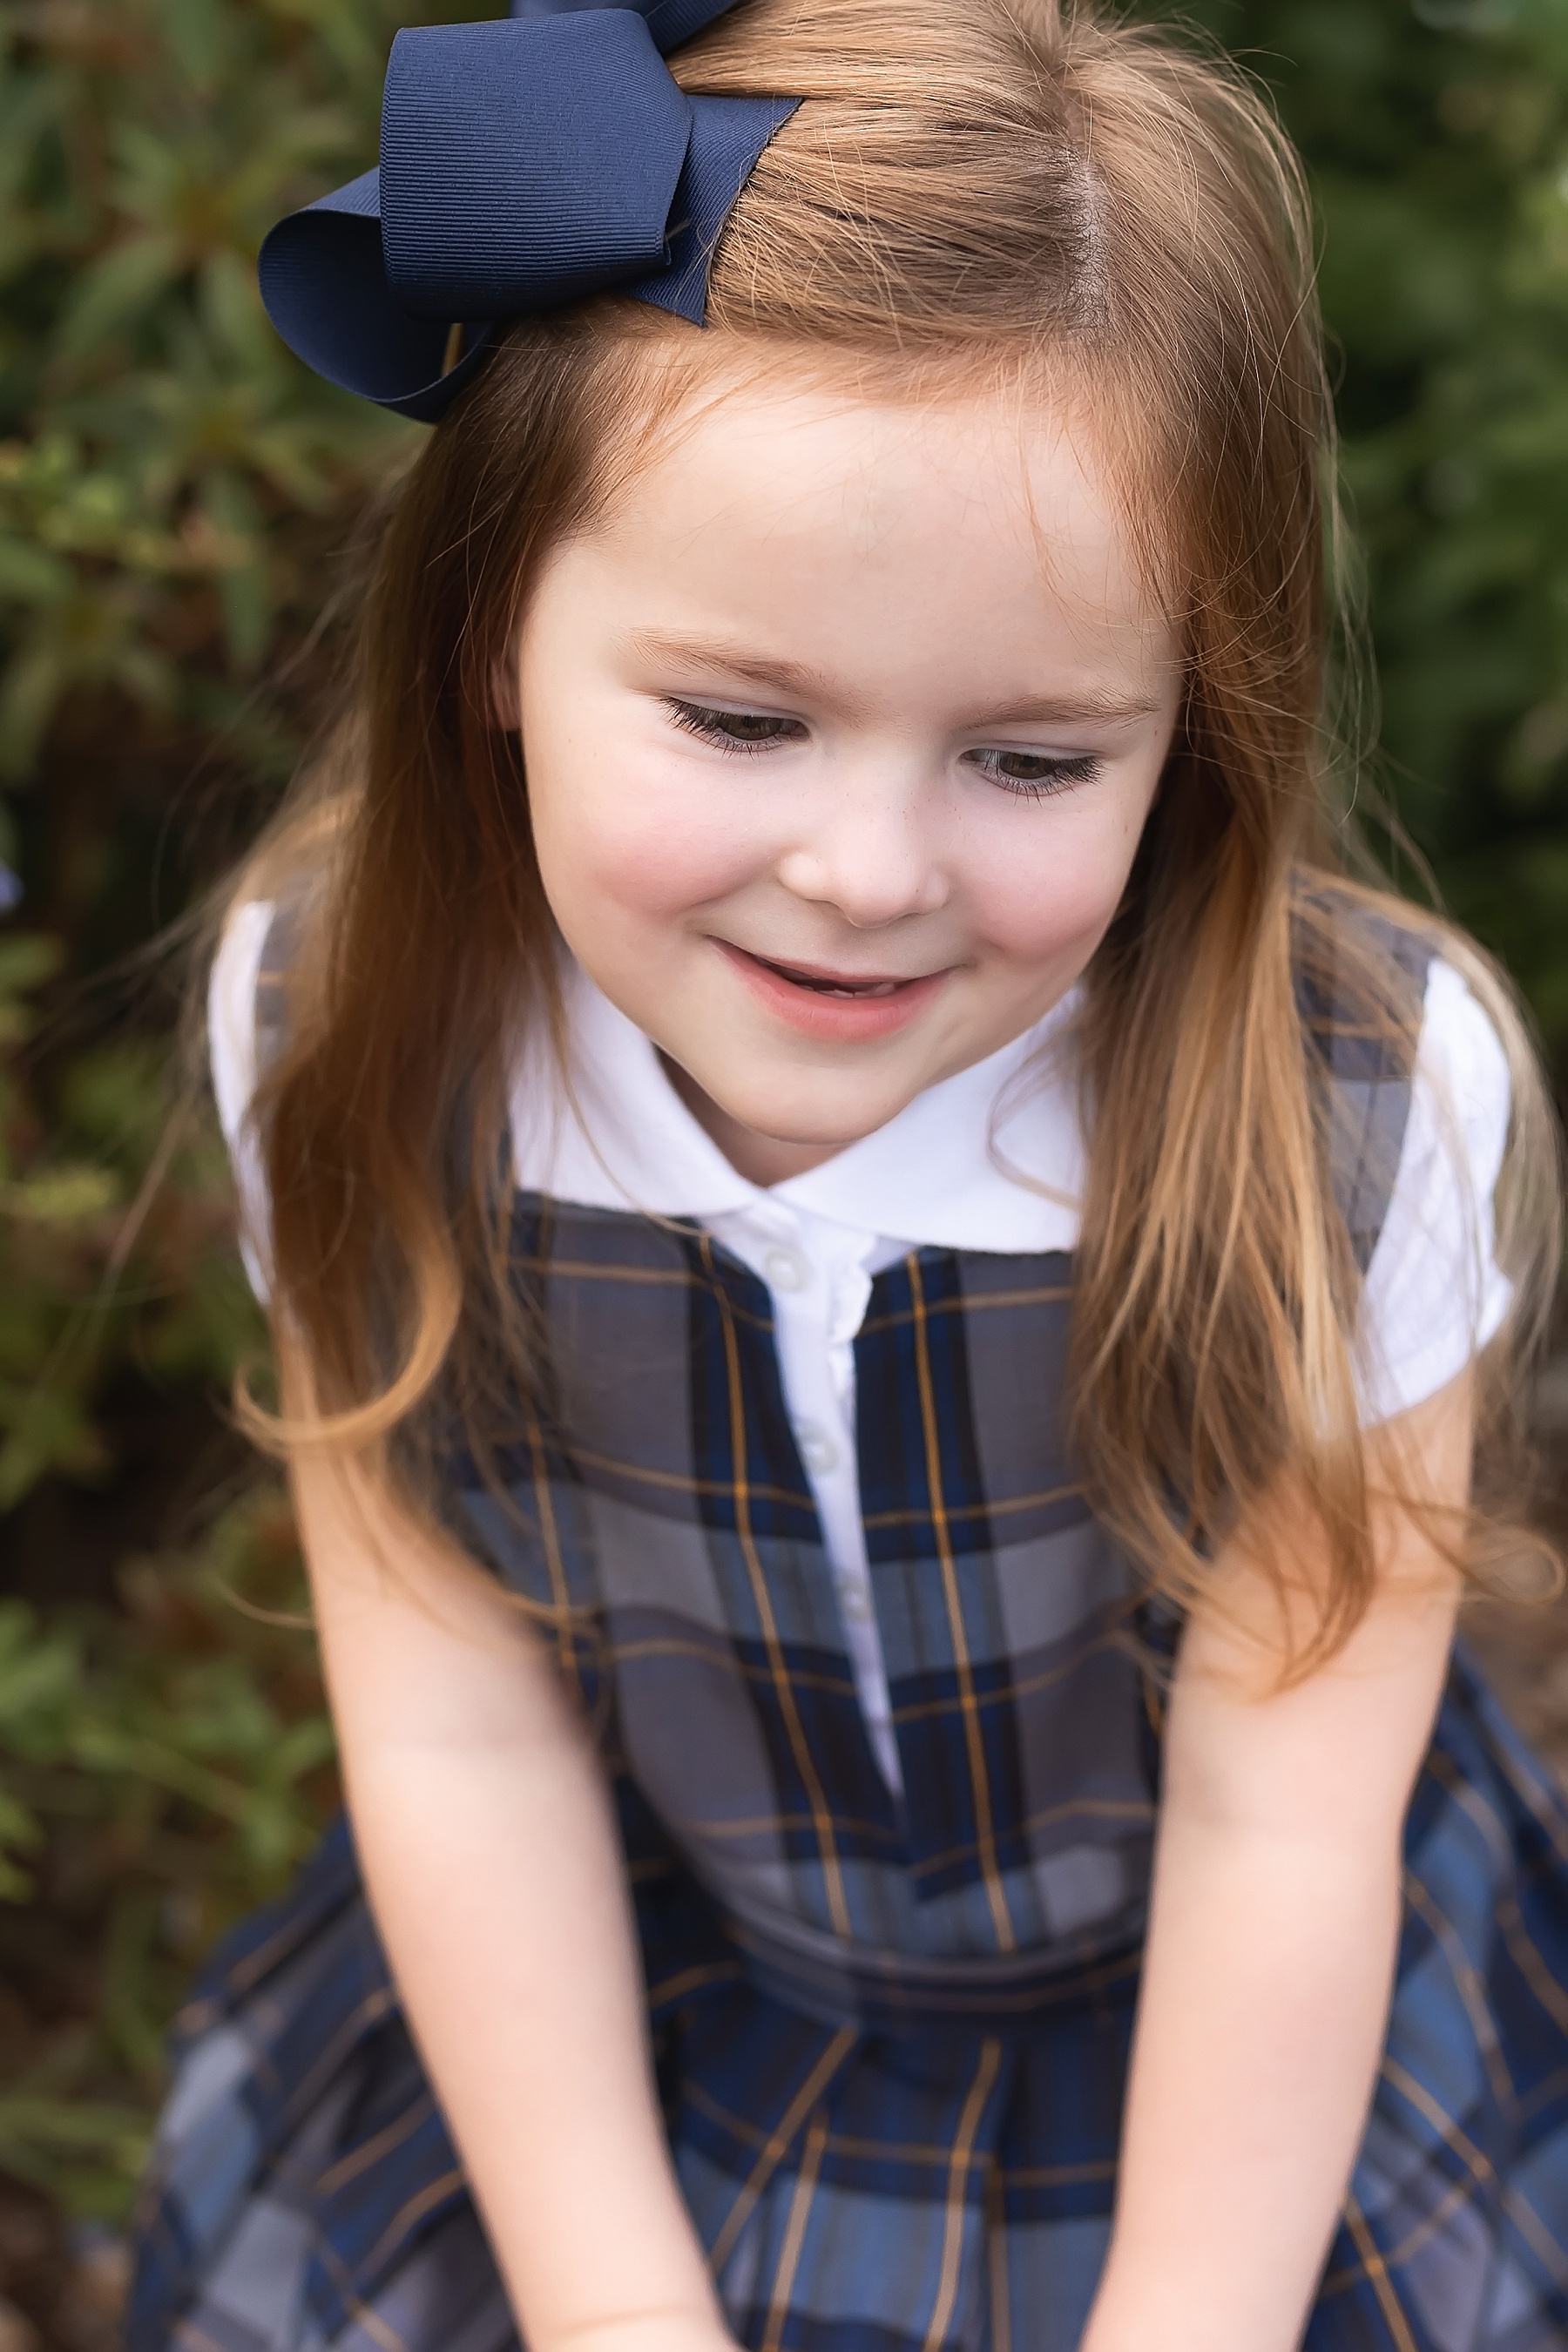 little girl dressed in navy and white plaid with red hair holding pre-school sign